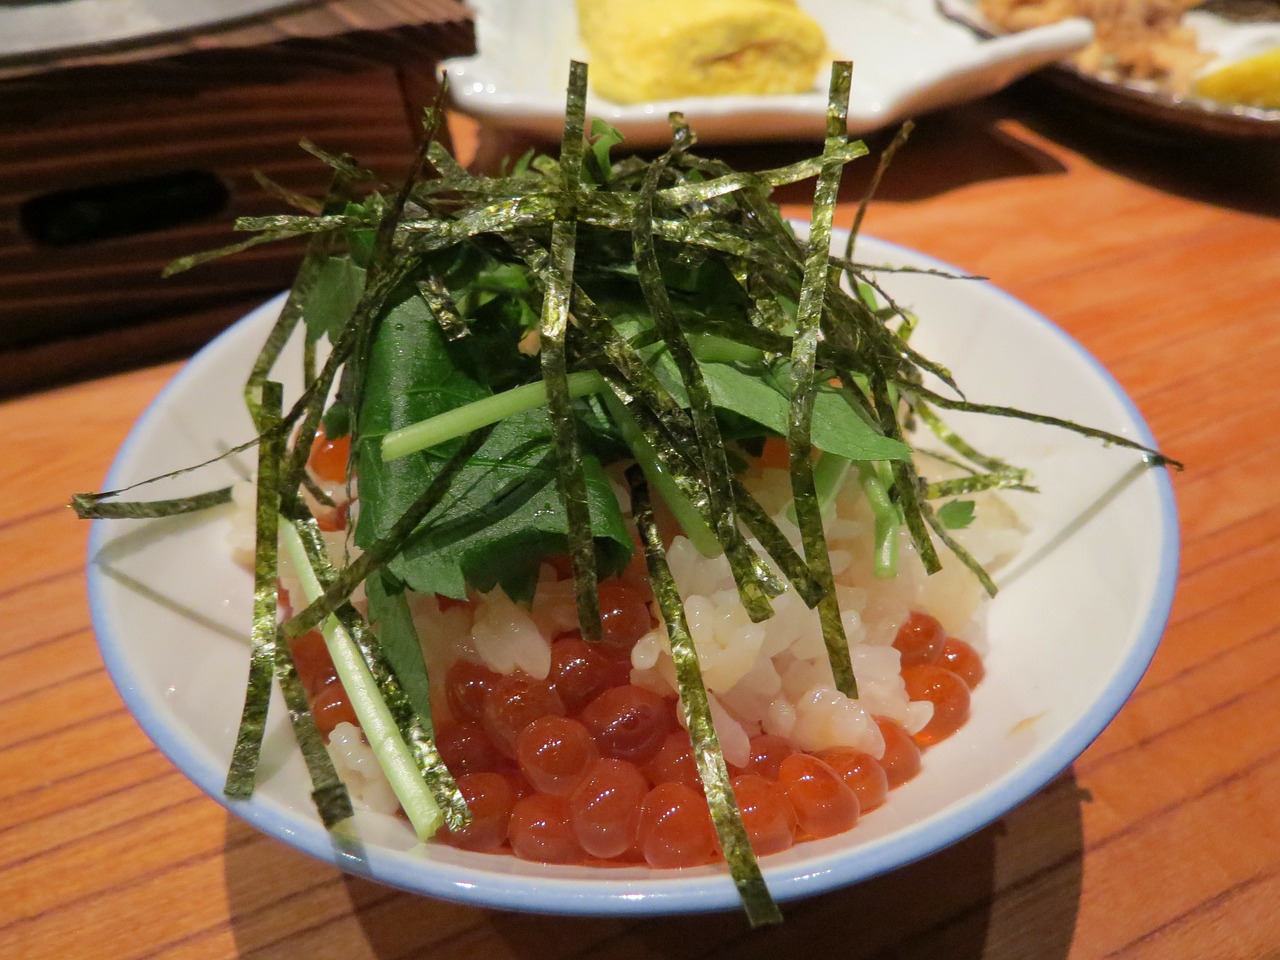 Call it deconstructed sushi if you will, this is a delicious-looking salmon roe dish!